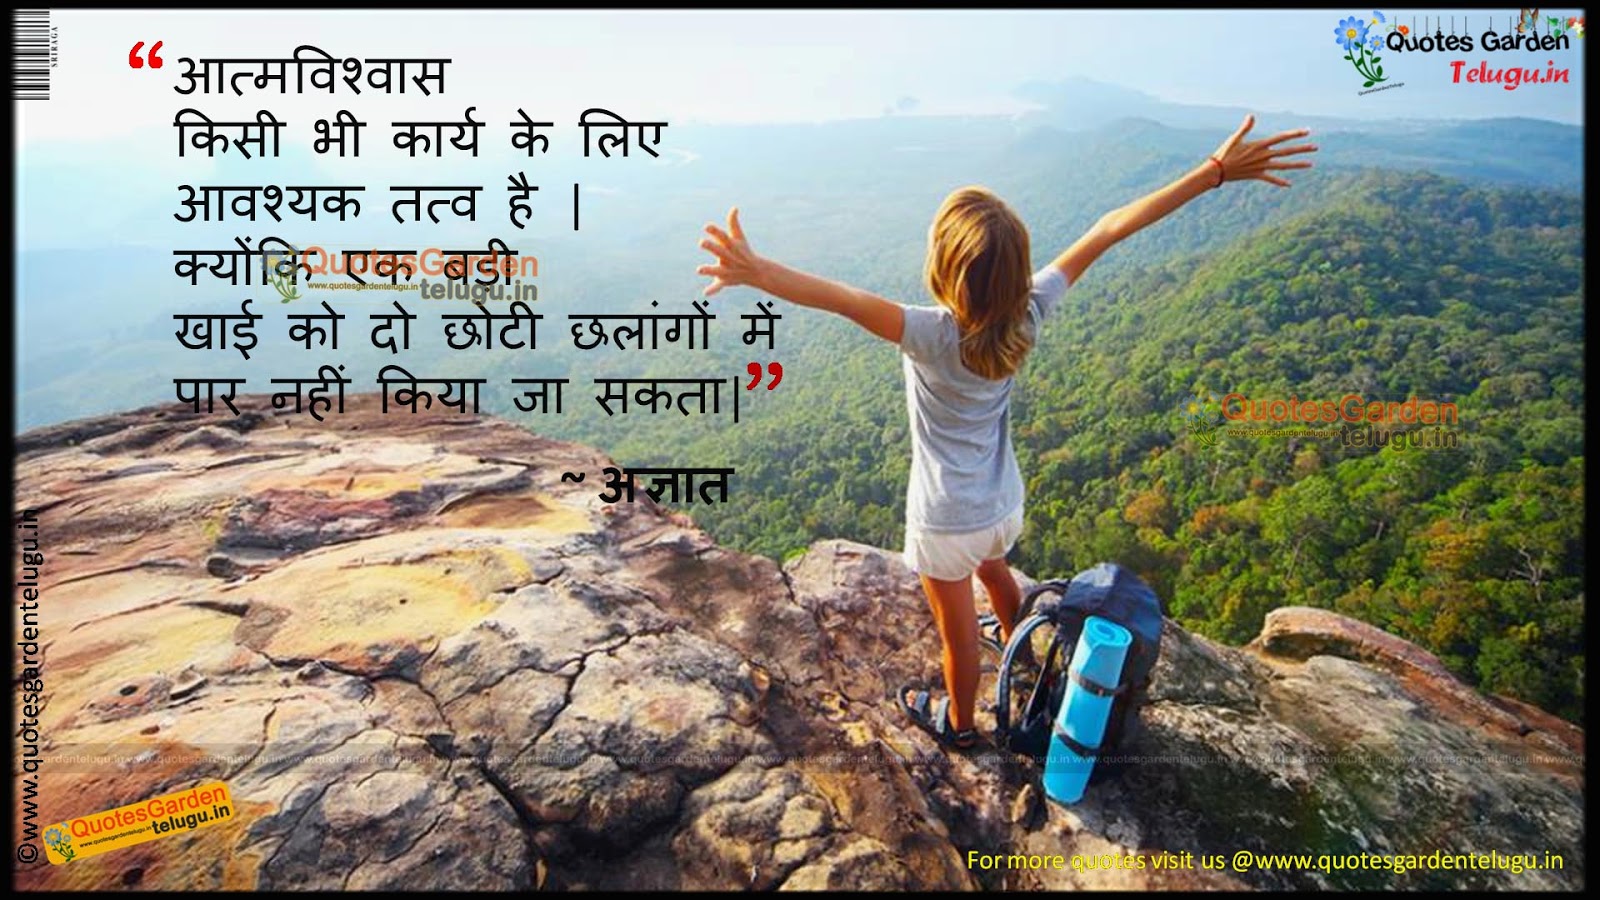 Inspirational Quotes In Hindi 1207 | Quotes Garden Telugu | Telugu Quotes |  English Quotes | Hindi Quotes |